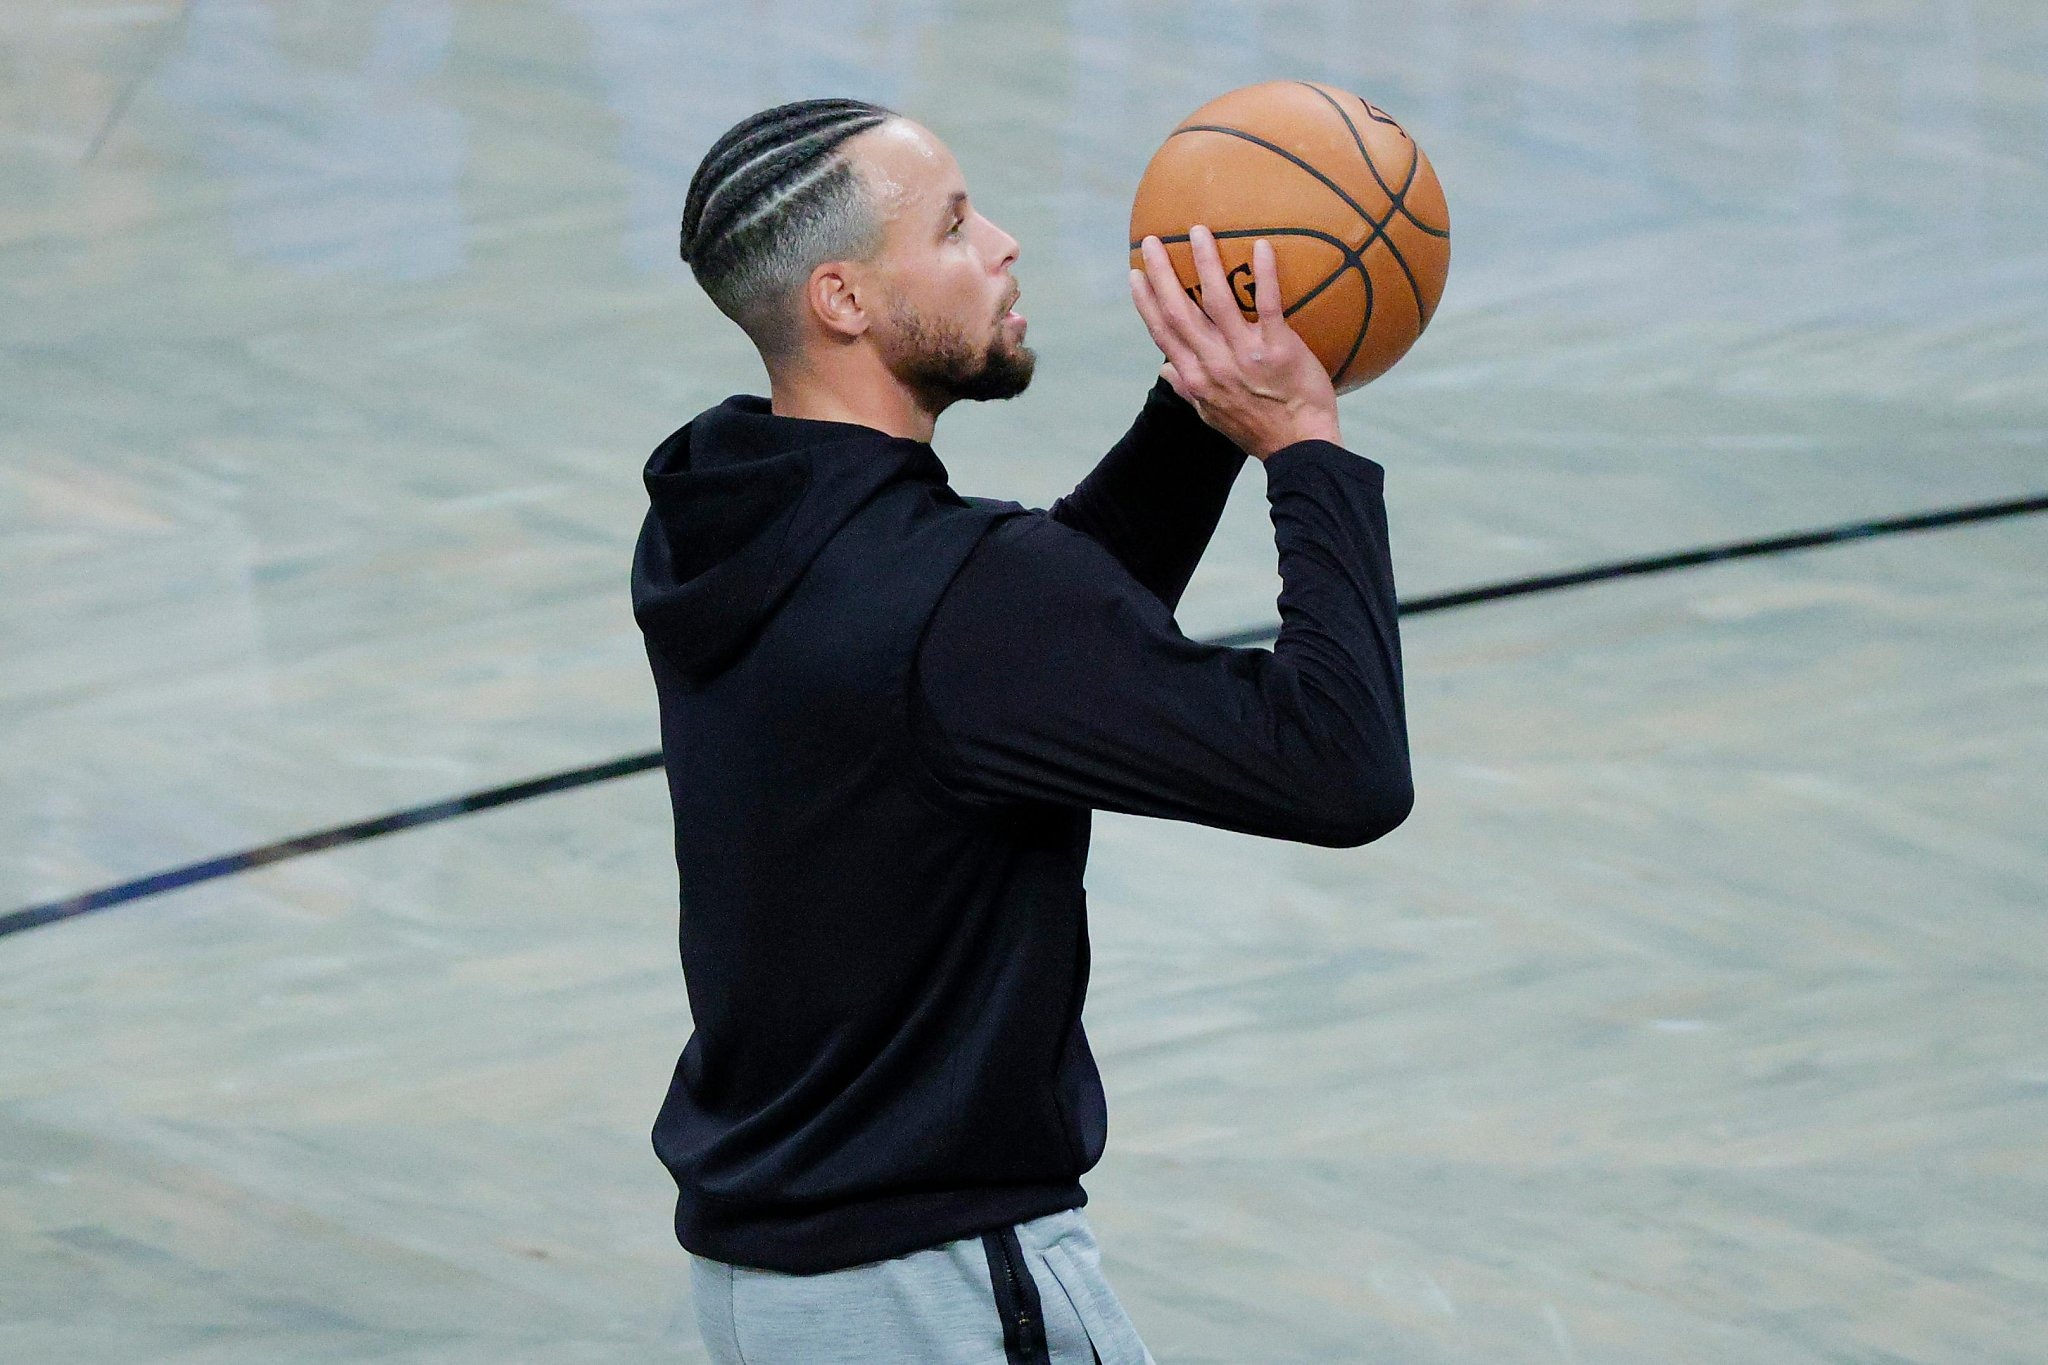 During practice, Steph Curry makes five 3-pointers in a row, which is "unreal."